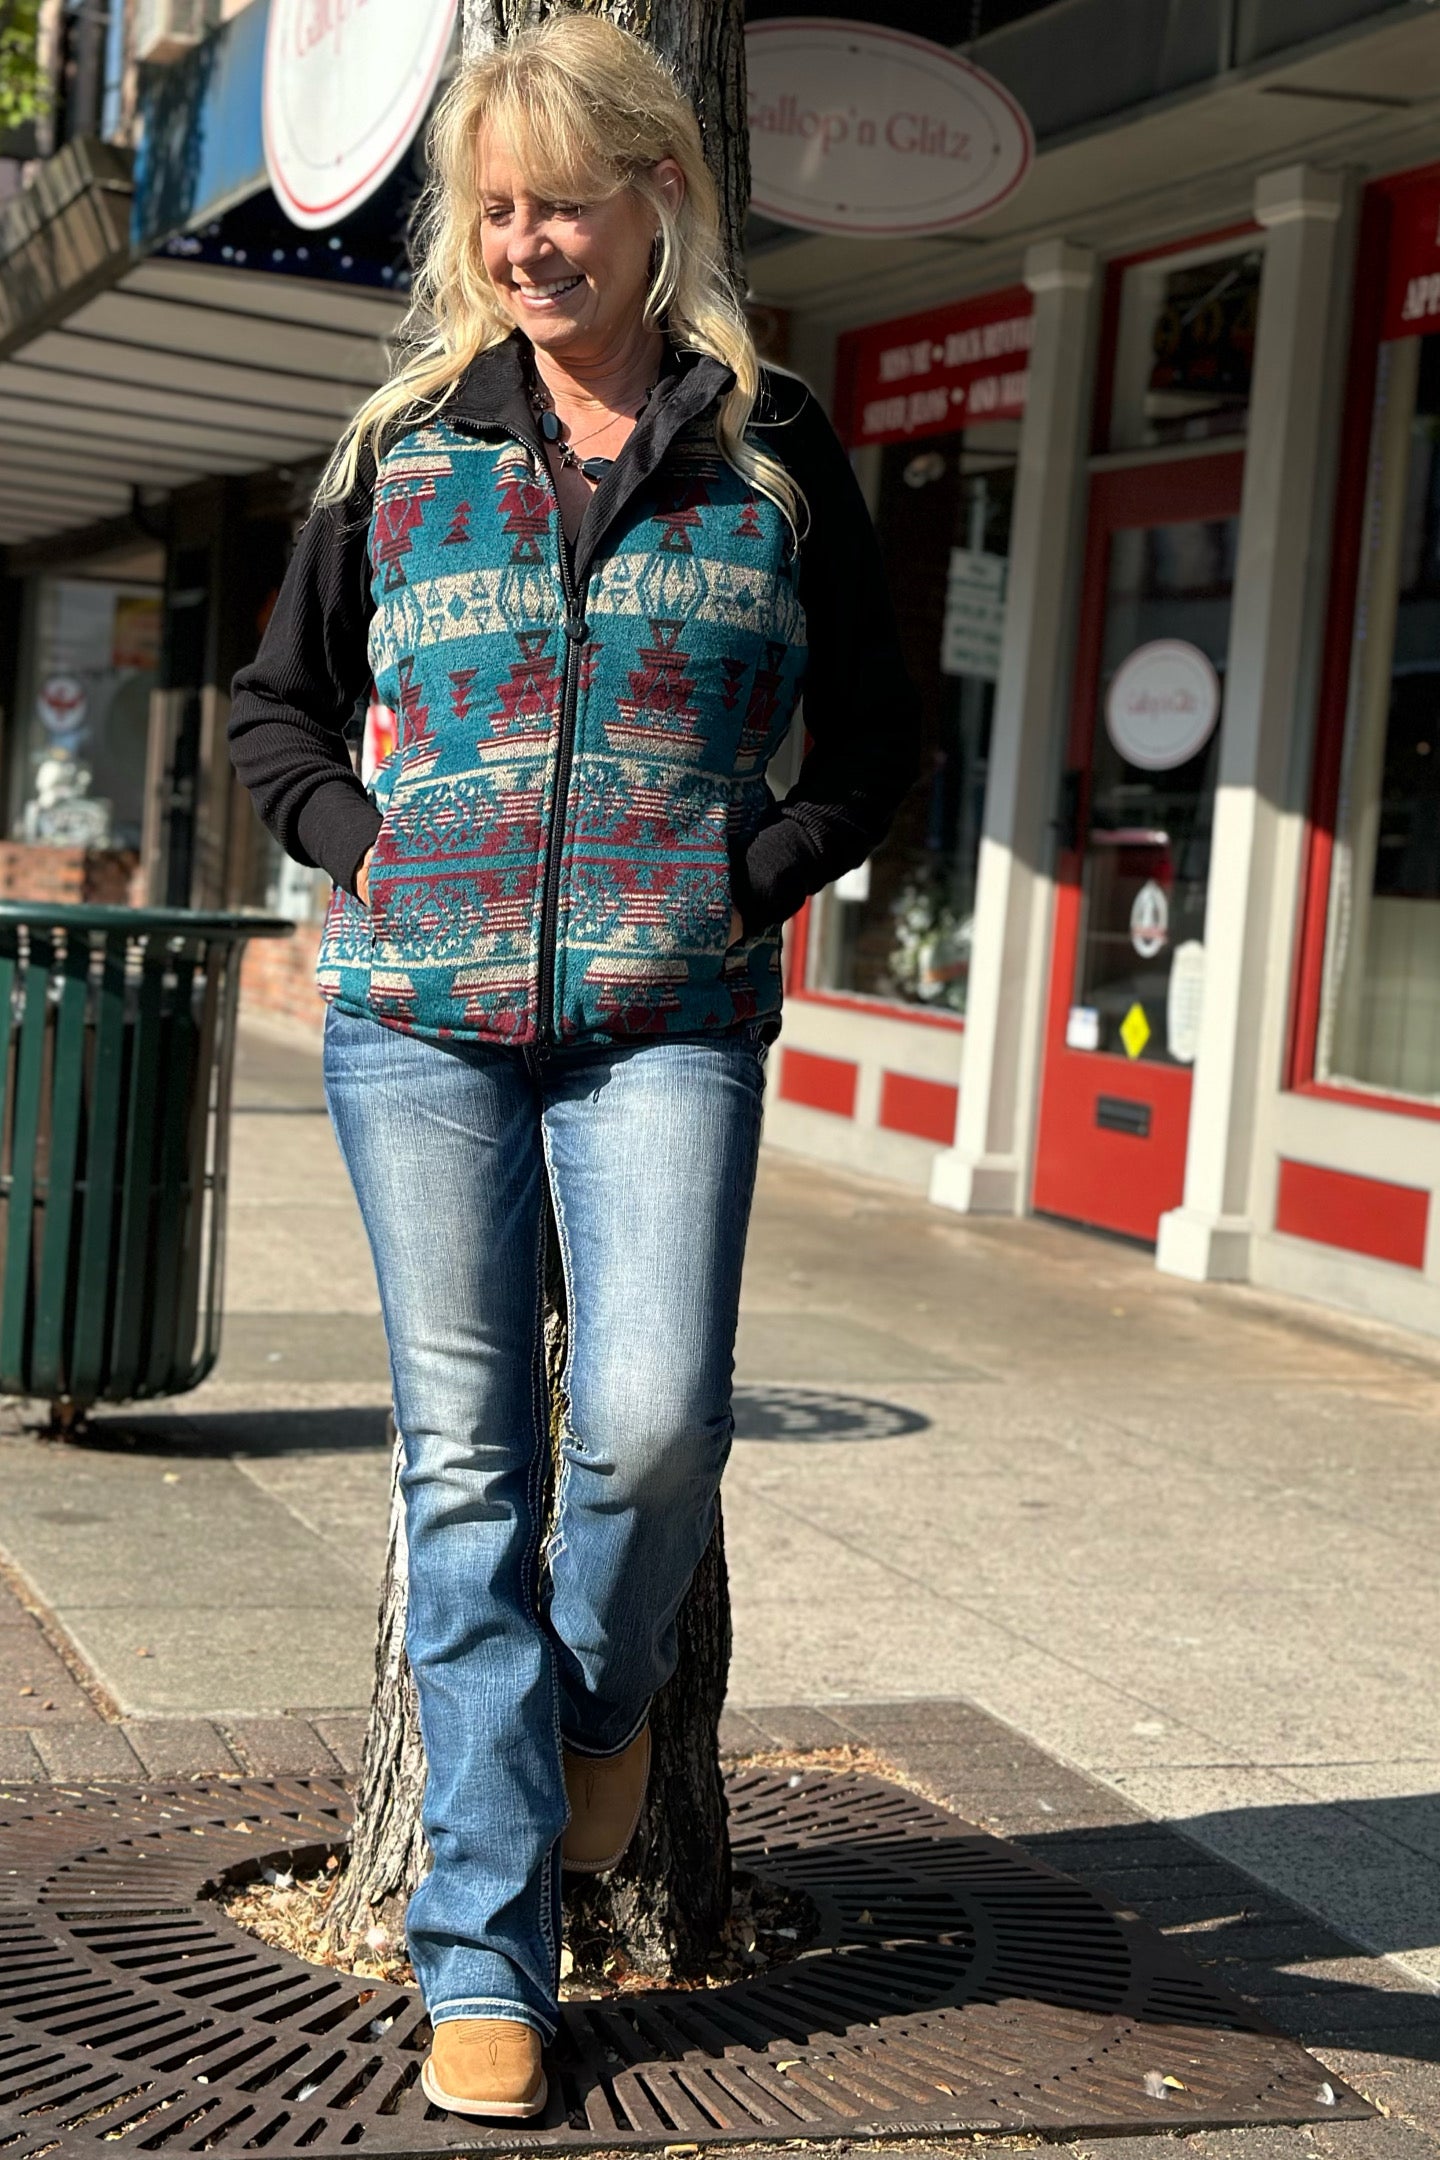 Women's Aztec Maybelle Vest by Outback Trading-Vest-Outback Trading-Gallop 'n Glitz- Women's Western Wear Boutique, Located in Grants Pass, Oregon